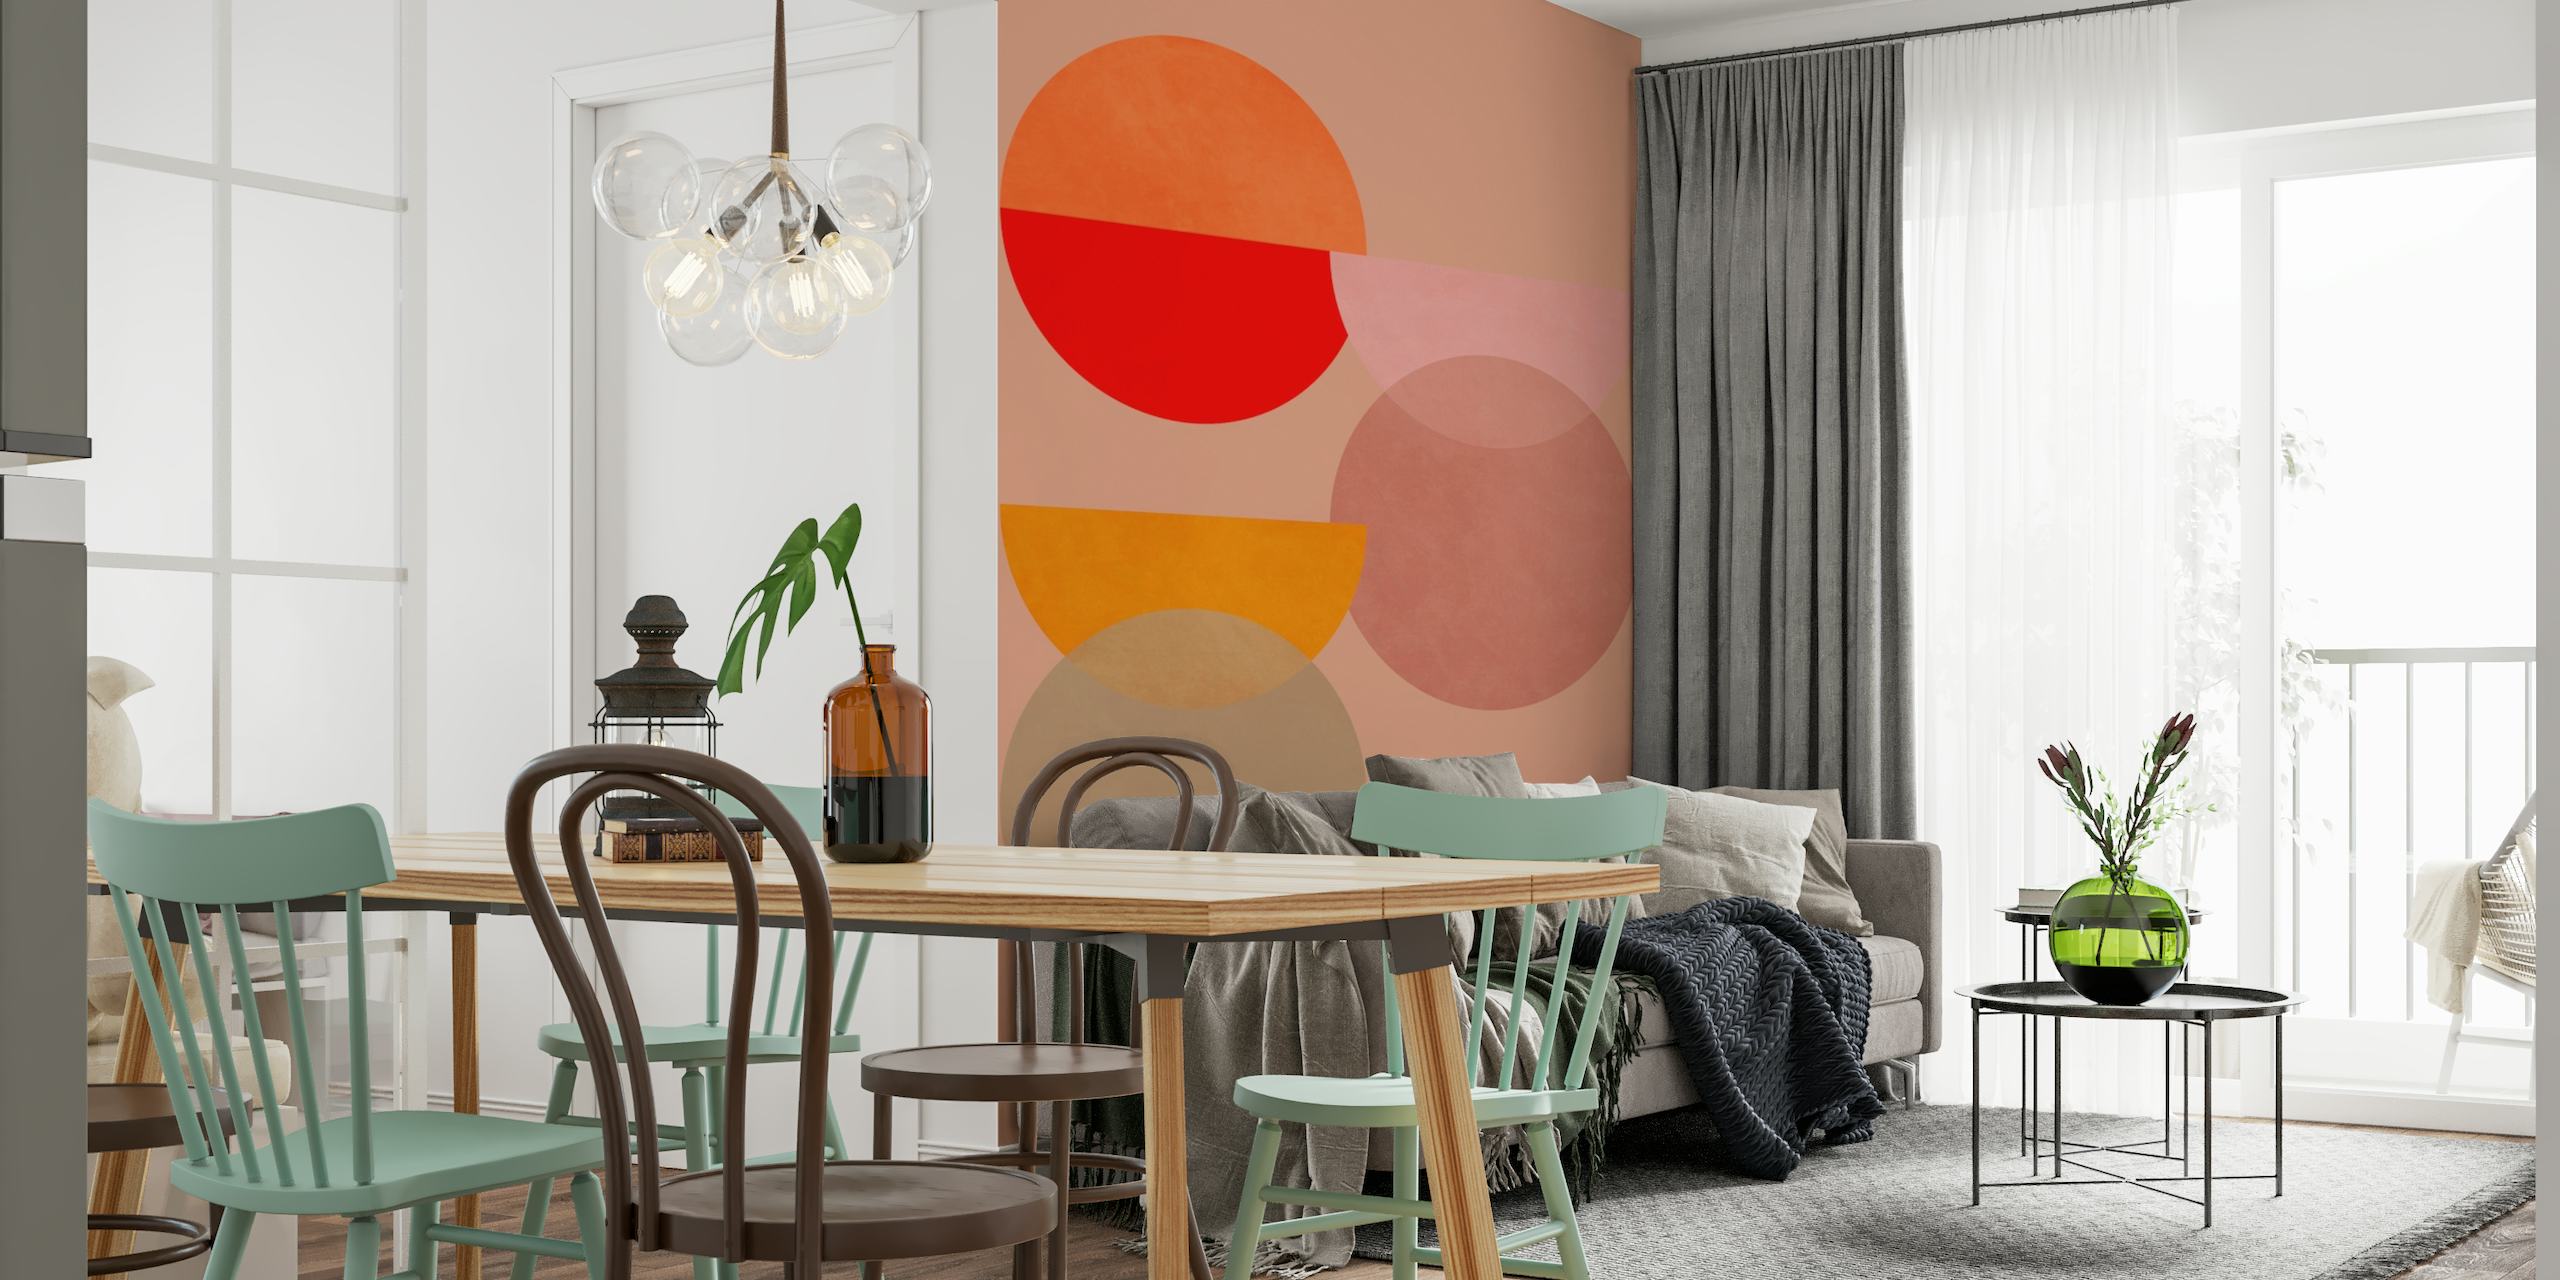 Abstract geometric wall mural with overlapping circles in shades of terracotta, peach, and dusky pink on a soft background.